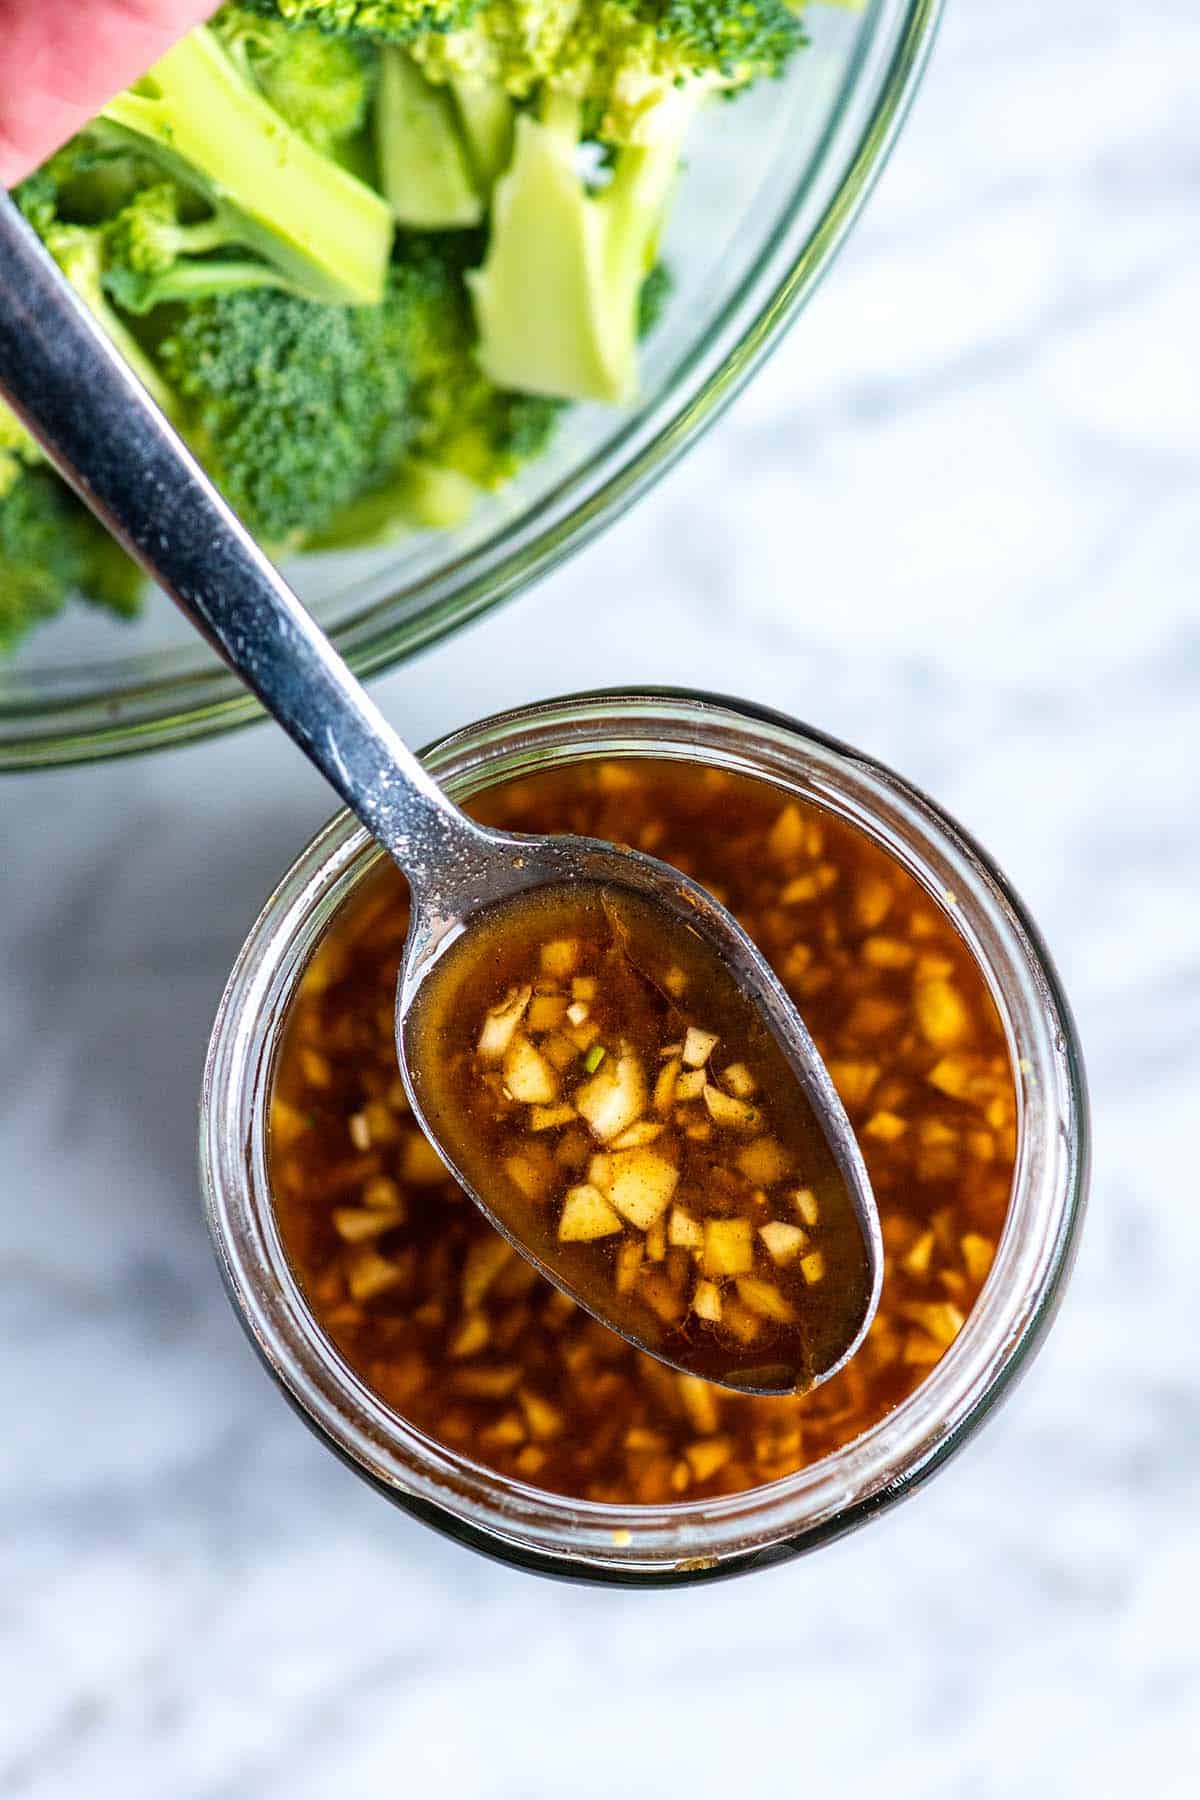 A jar of homemade stir fry sauce made with fresh garlic and ginger.